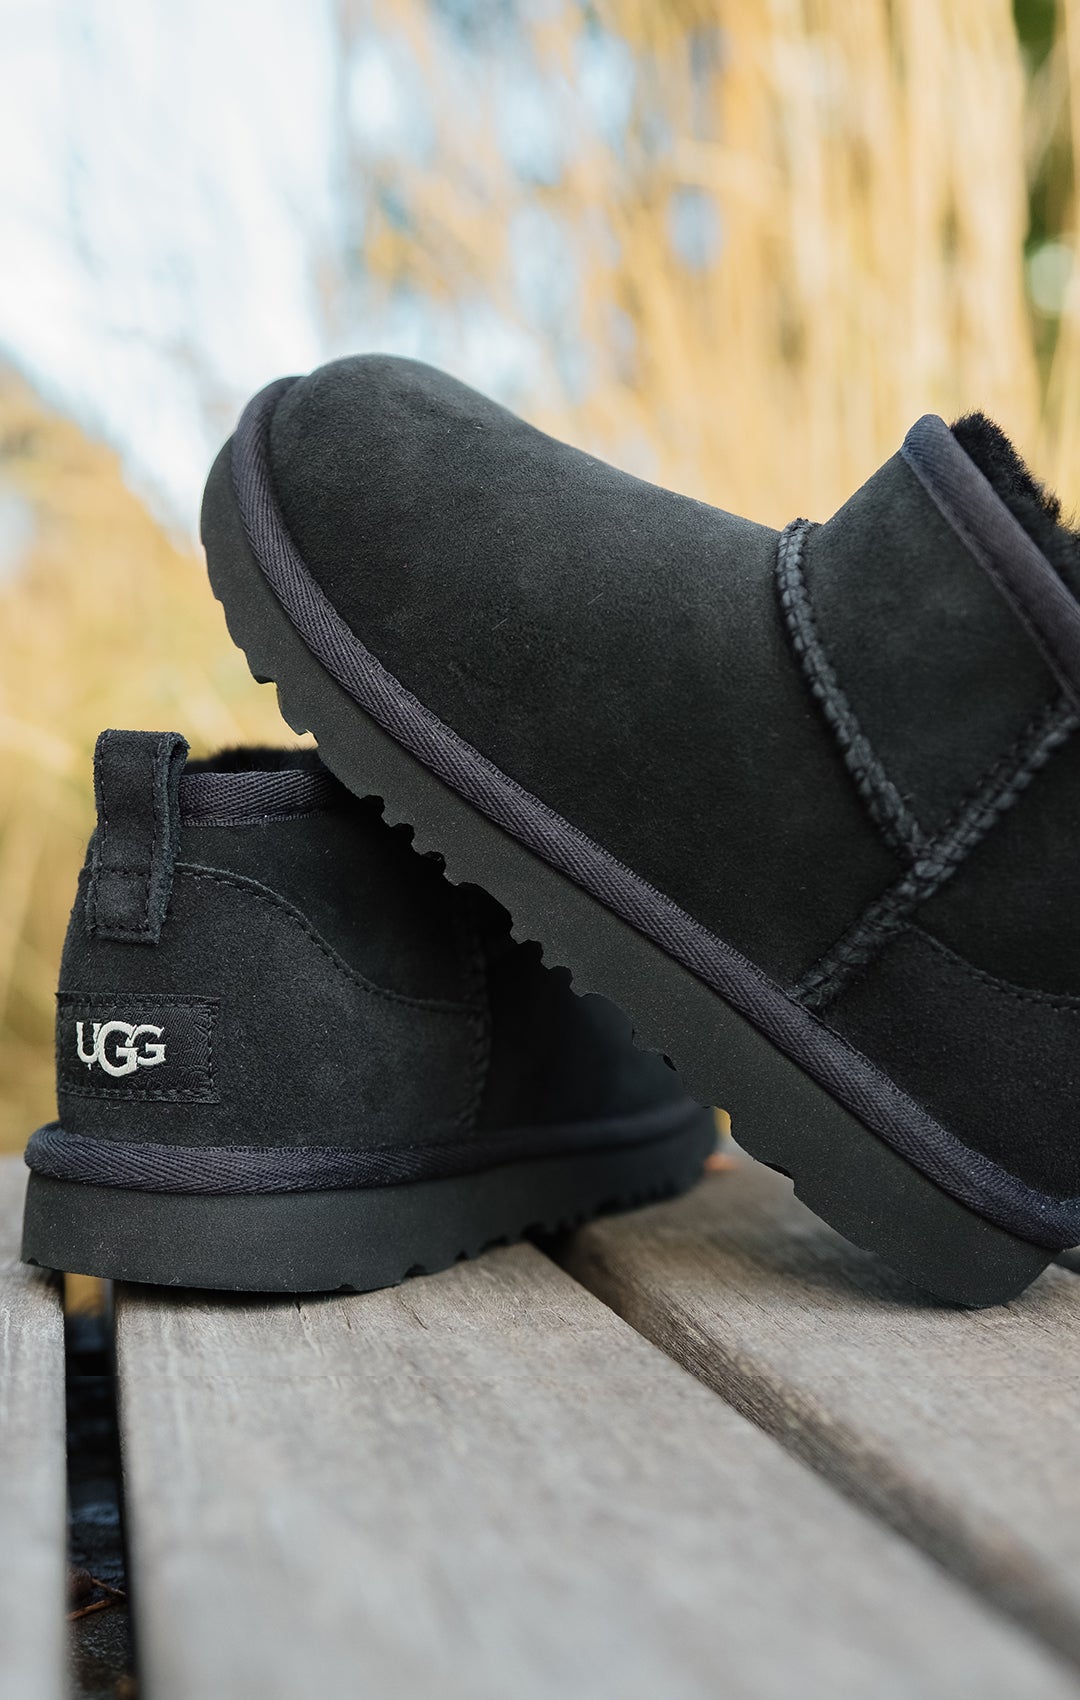 How Ugg Boots Became Fashion's Hottest New Shoe—Again